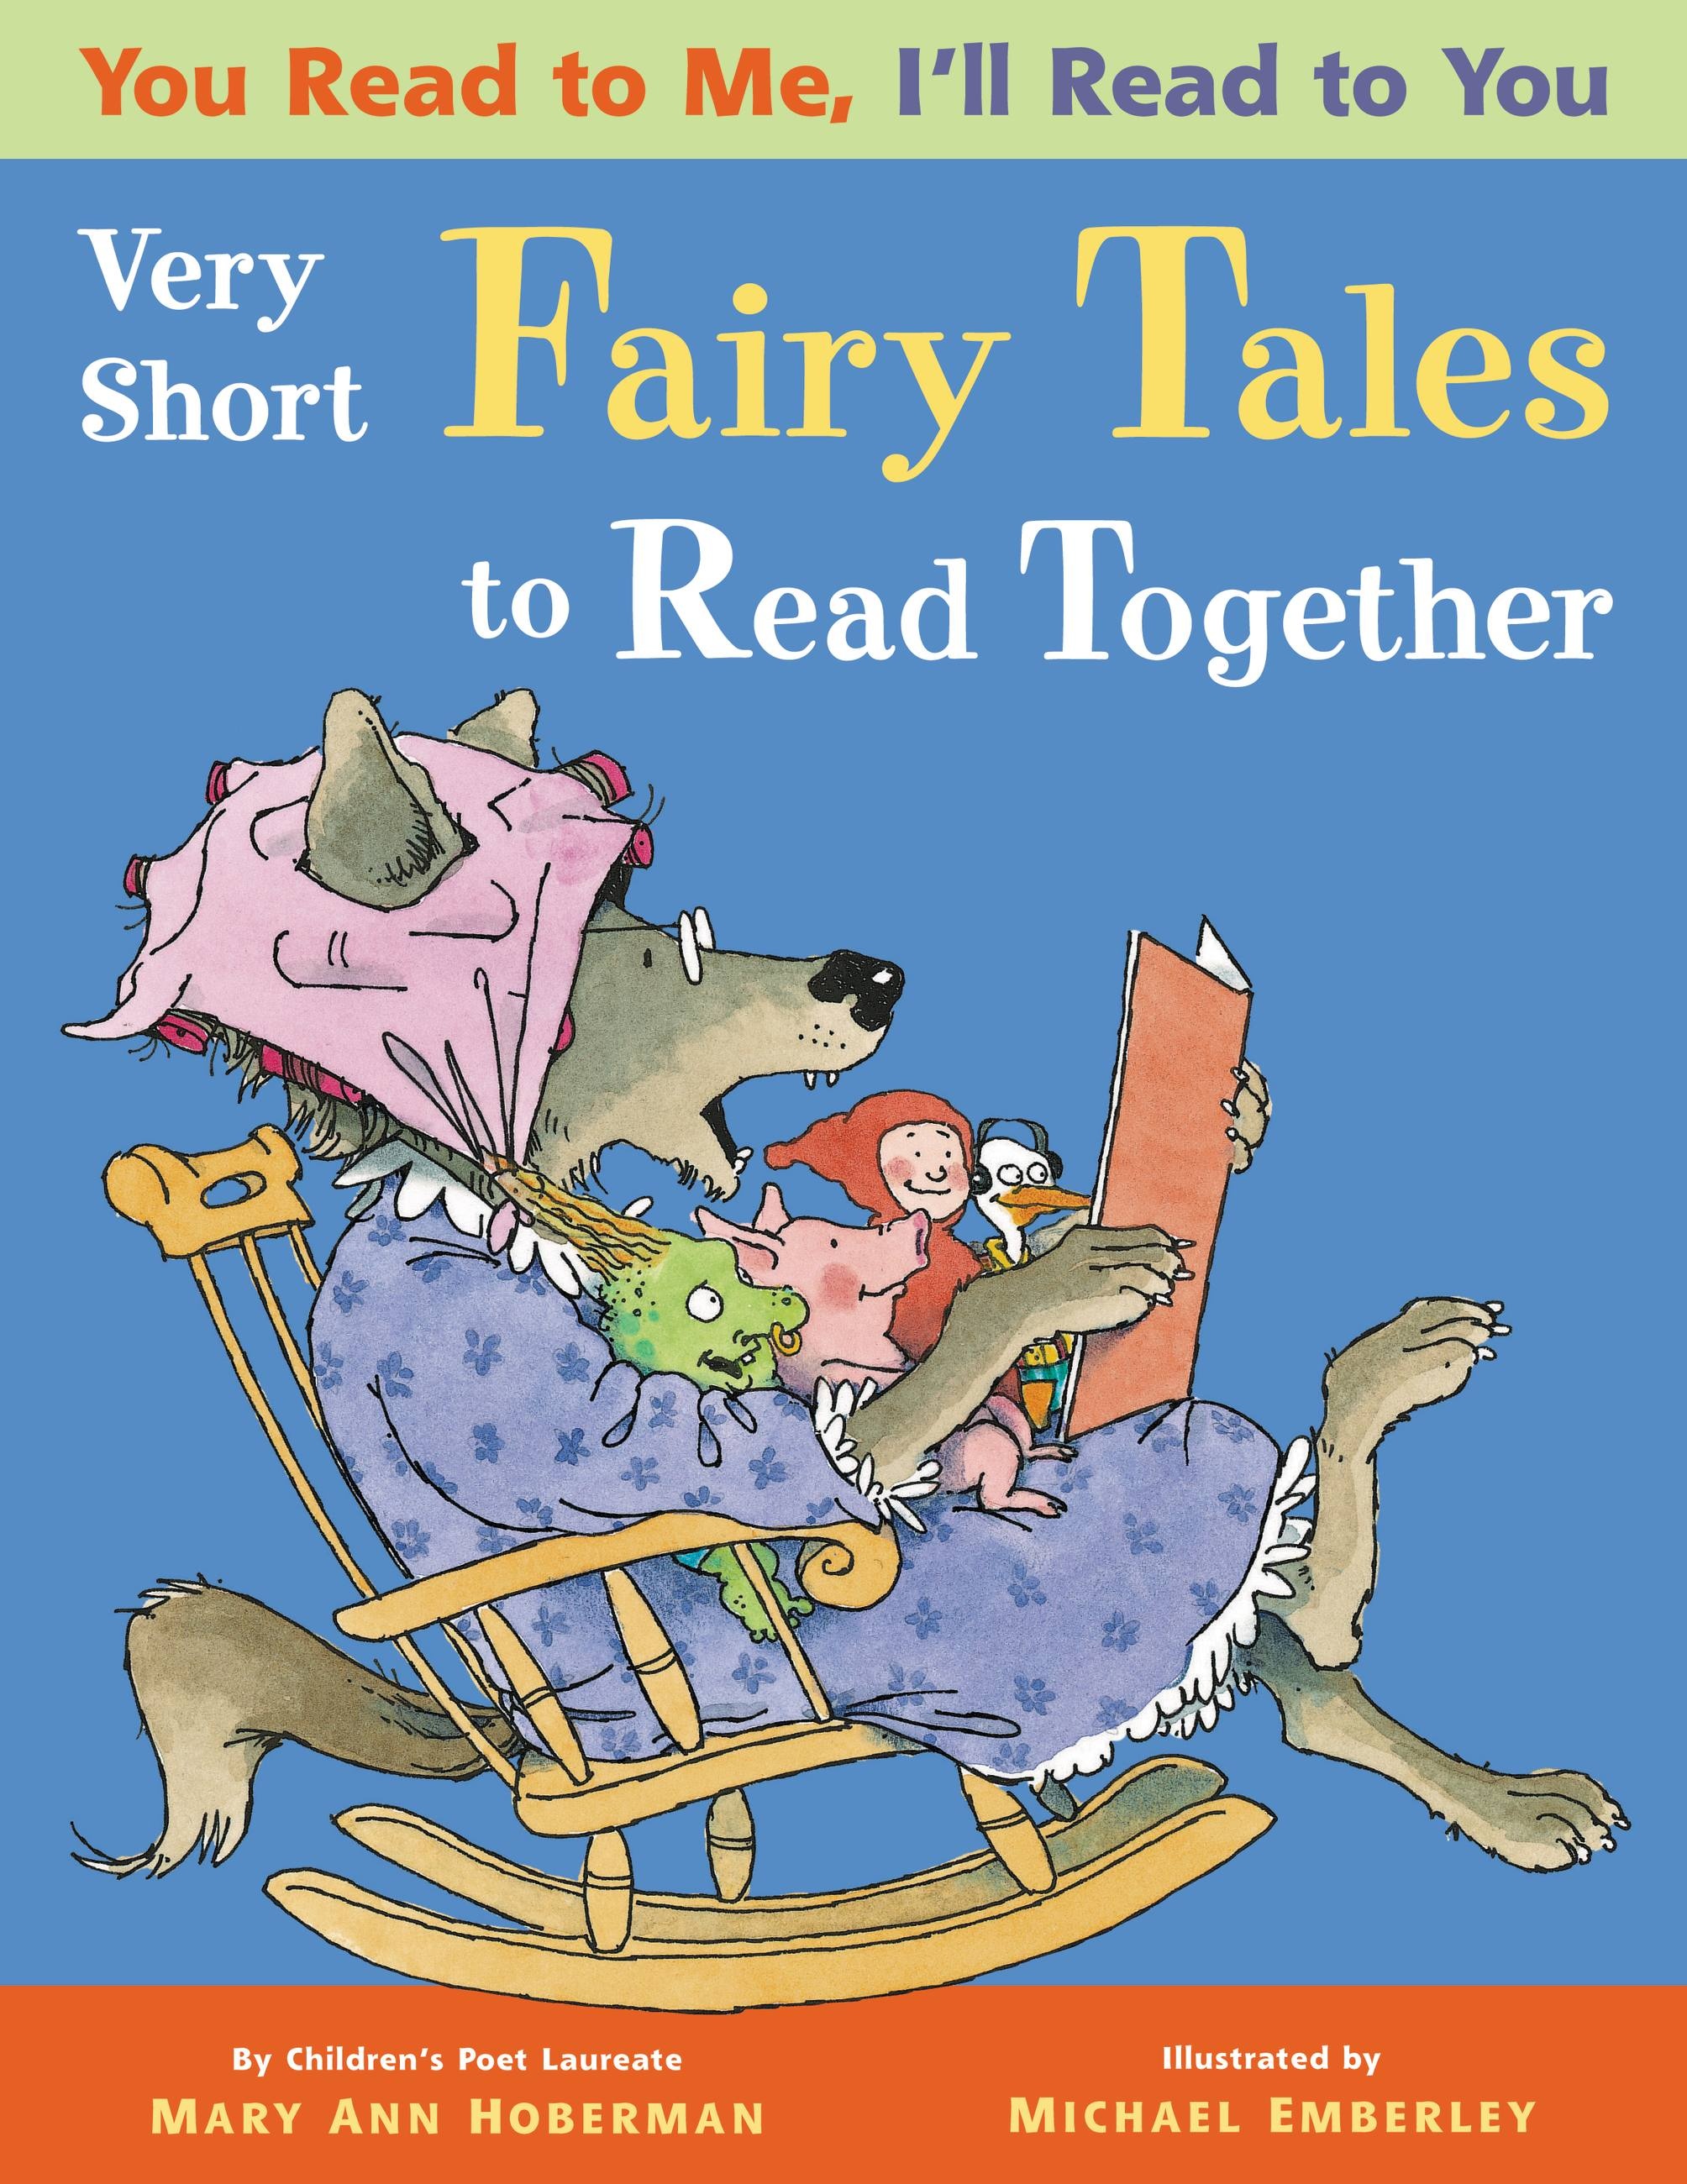 Very Short Fairy Tales to Read Together by Mary Ann Hoberman Hachette Book  Group